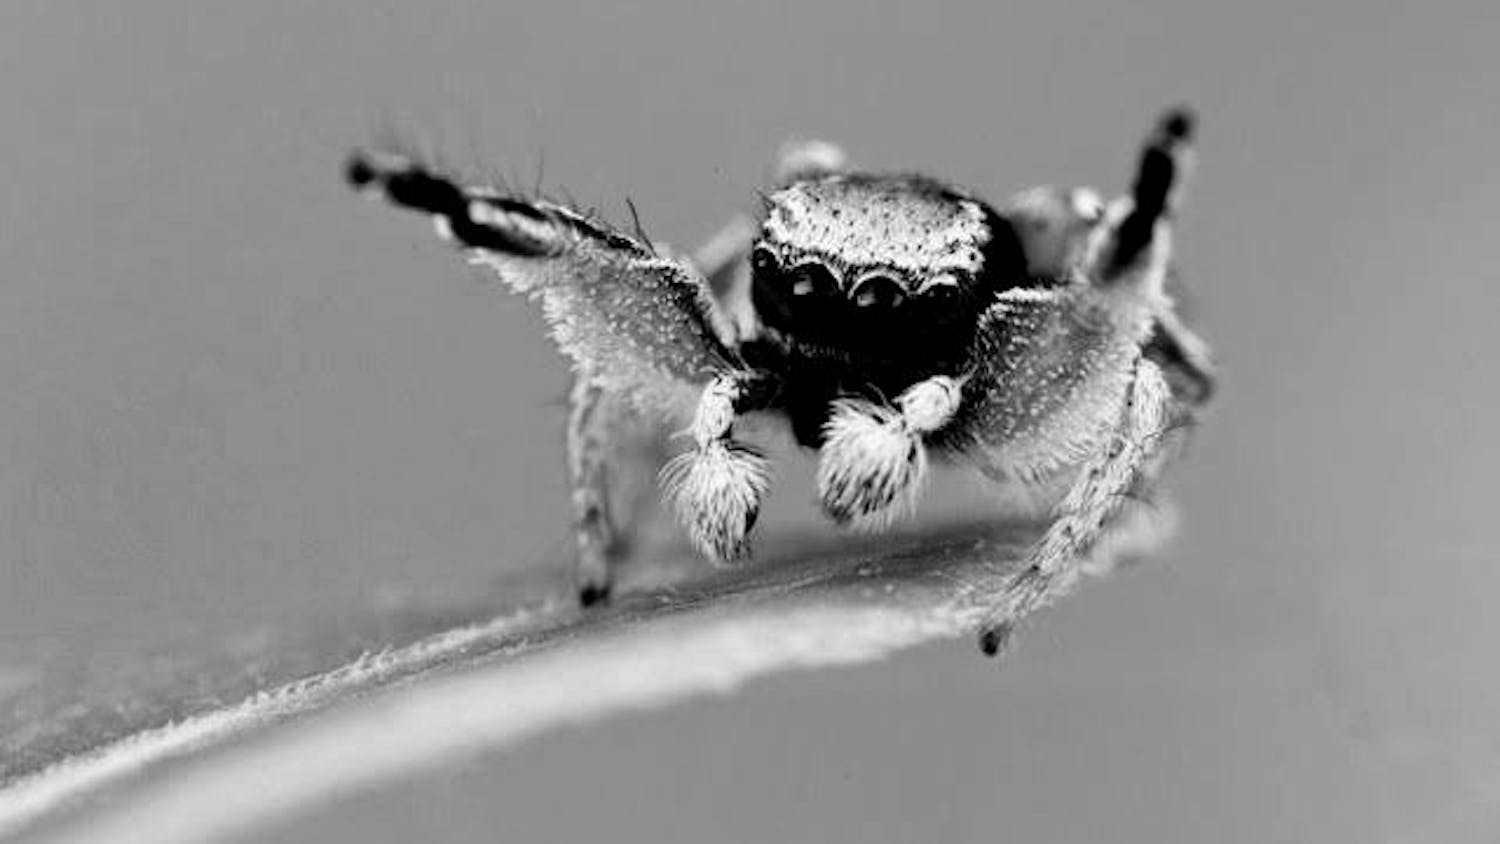 A micro-CT image of a scanned jumping spider, called Anasaitis canosa.&nbsp;
&nbsp;